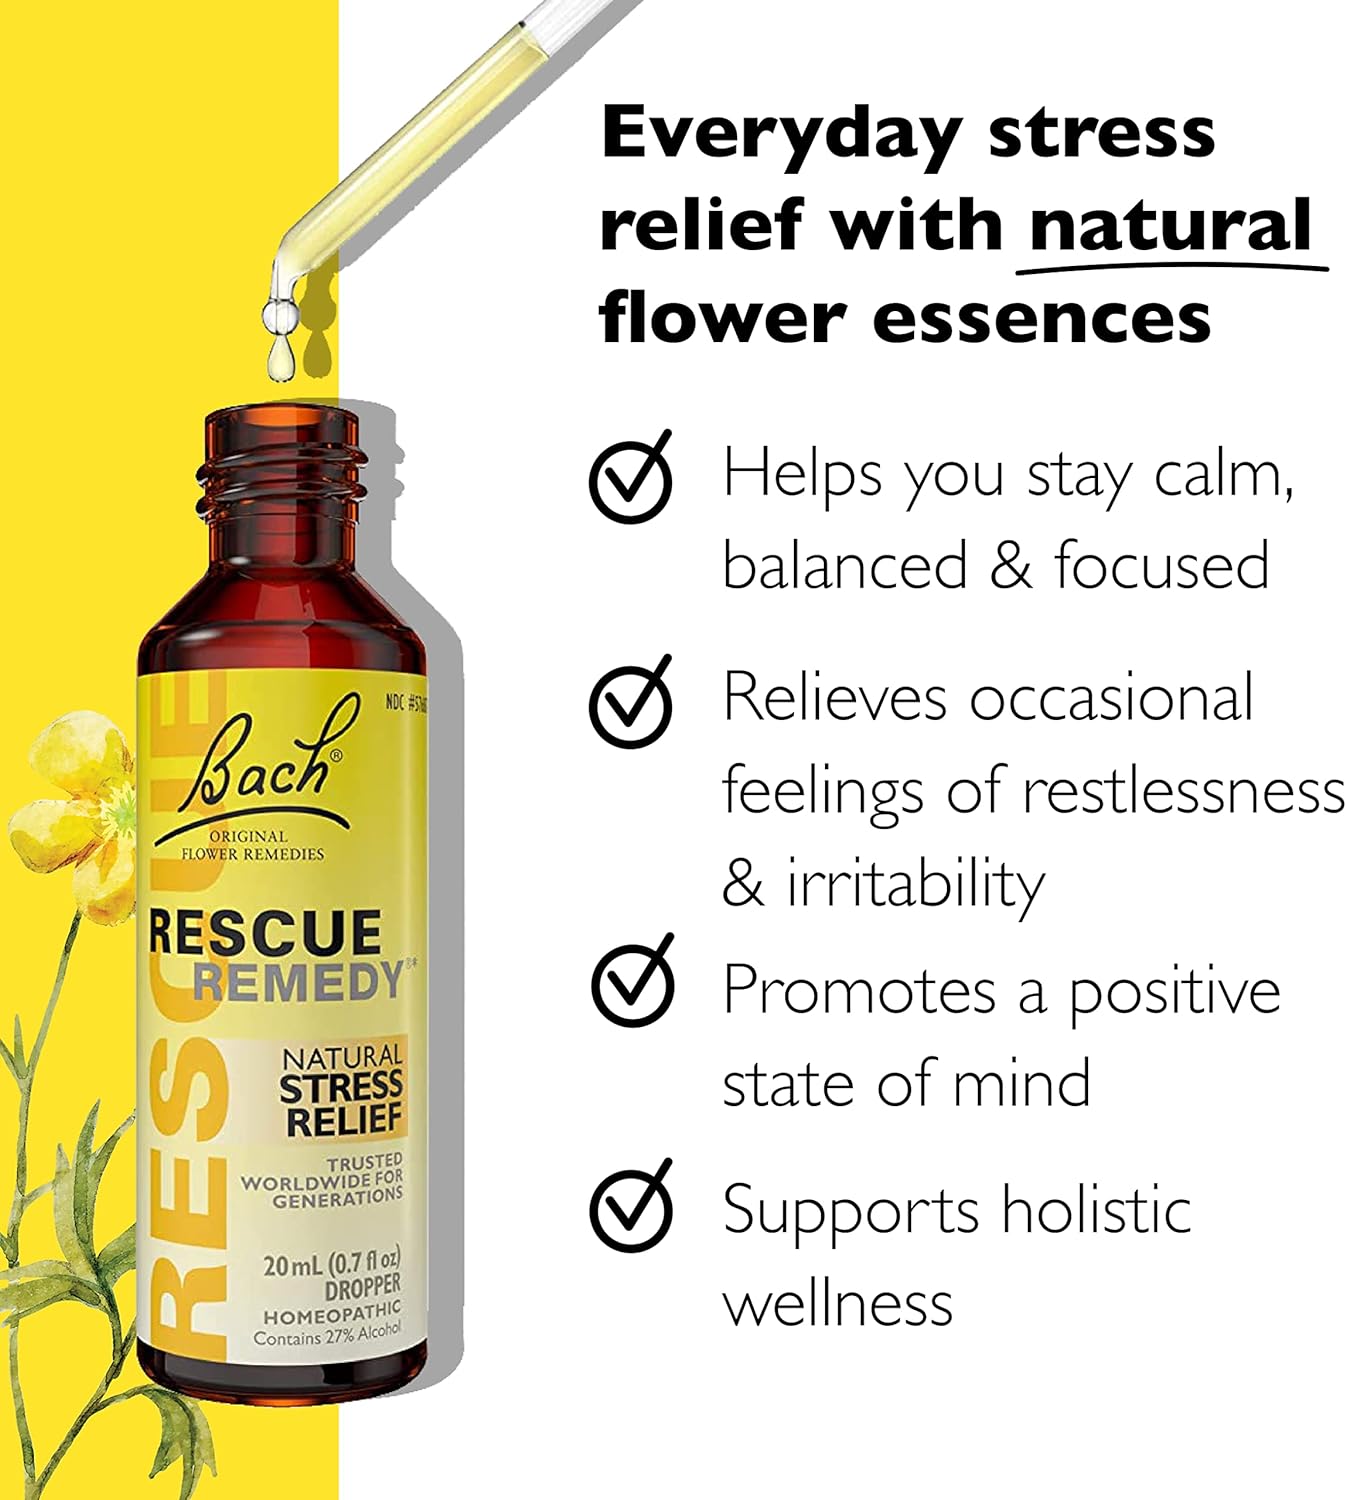 Bach RESCUE REMEDY Dropper 20mL, Natural Stress Relief, Homeopathic Flower Essence, Vegan, Gluten & Sugar-Free, Non-Habit Forming : Health & Household